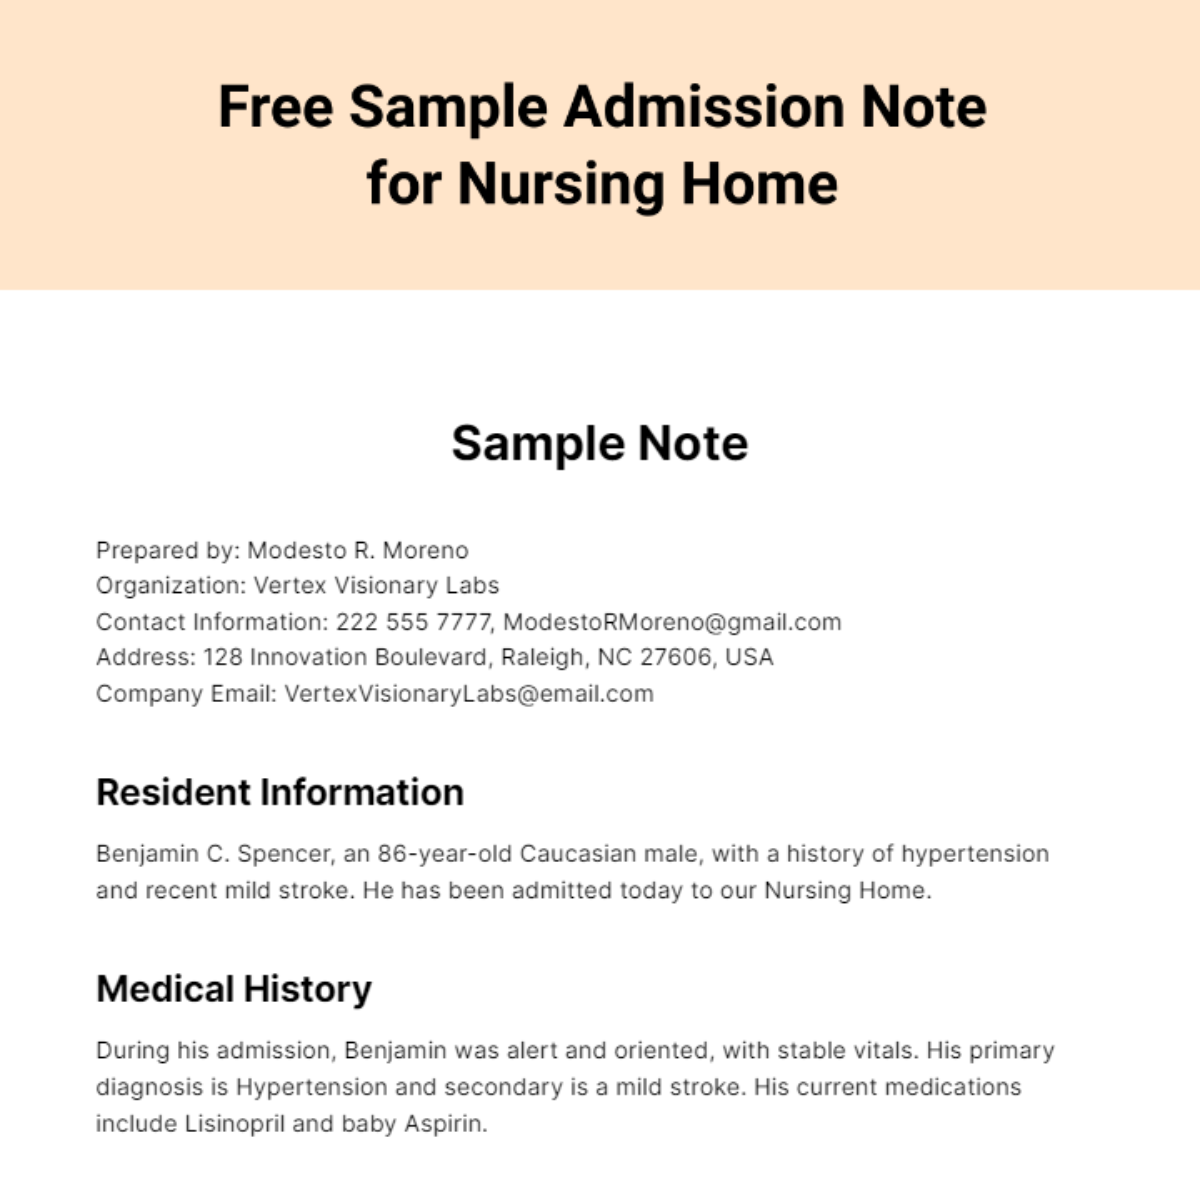 Free Sample Admission Note for Nursing Home Template